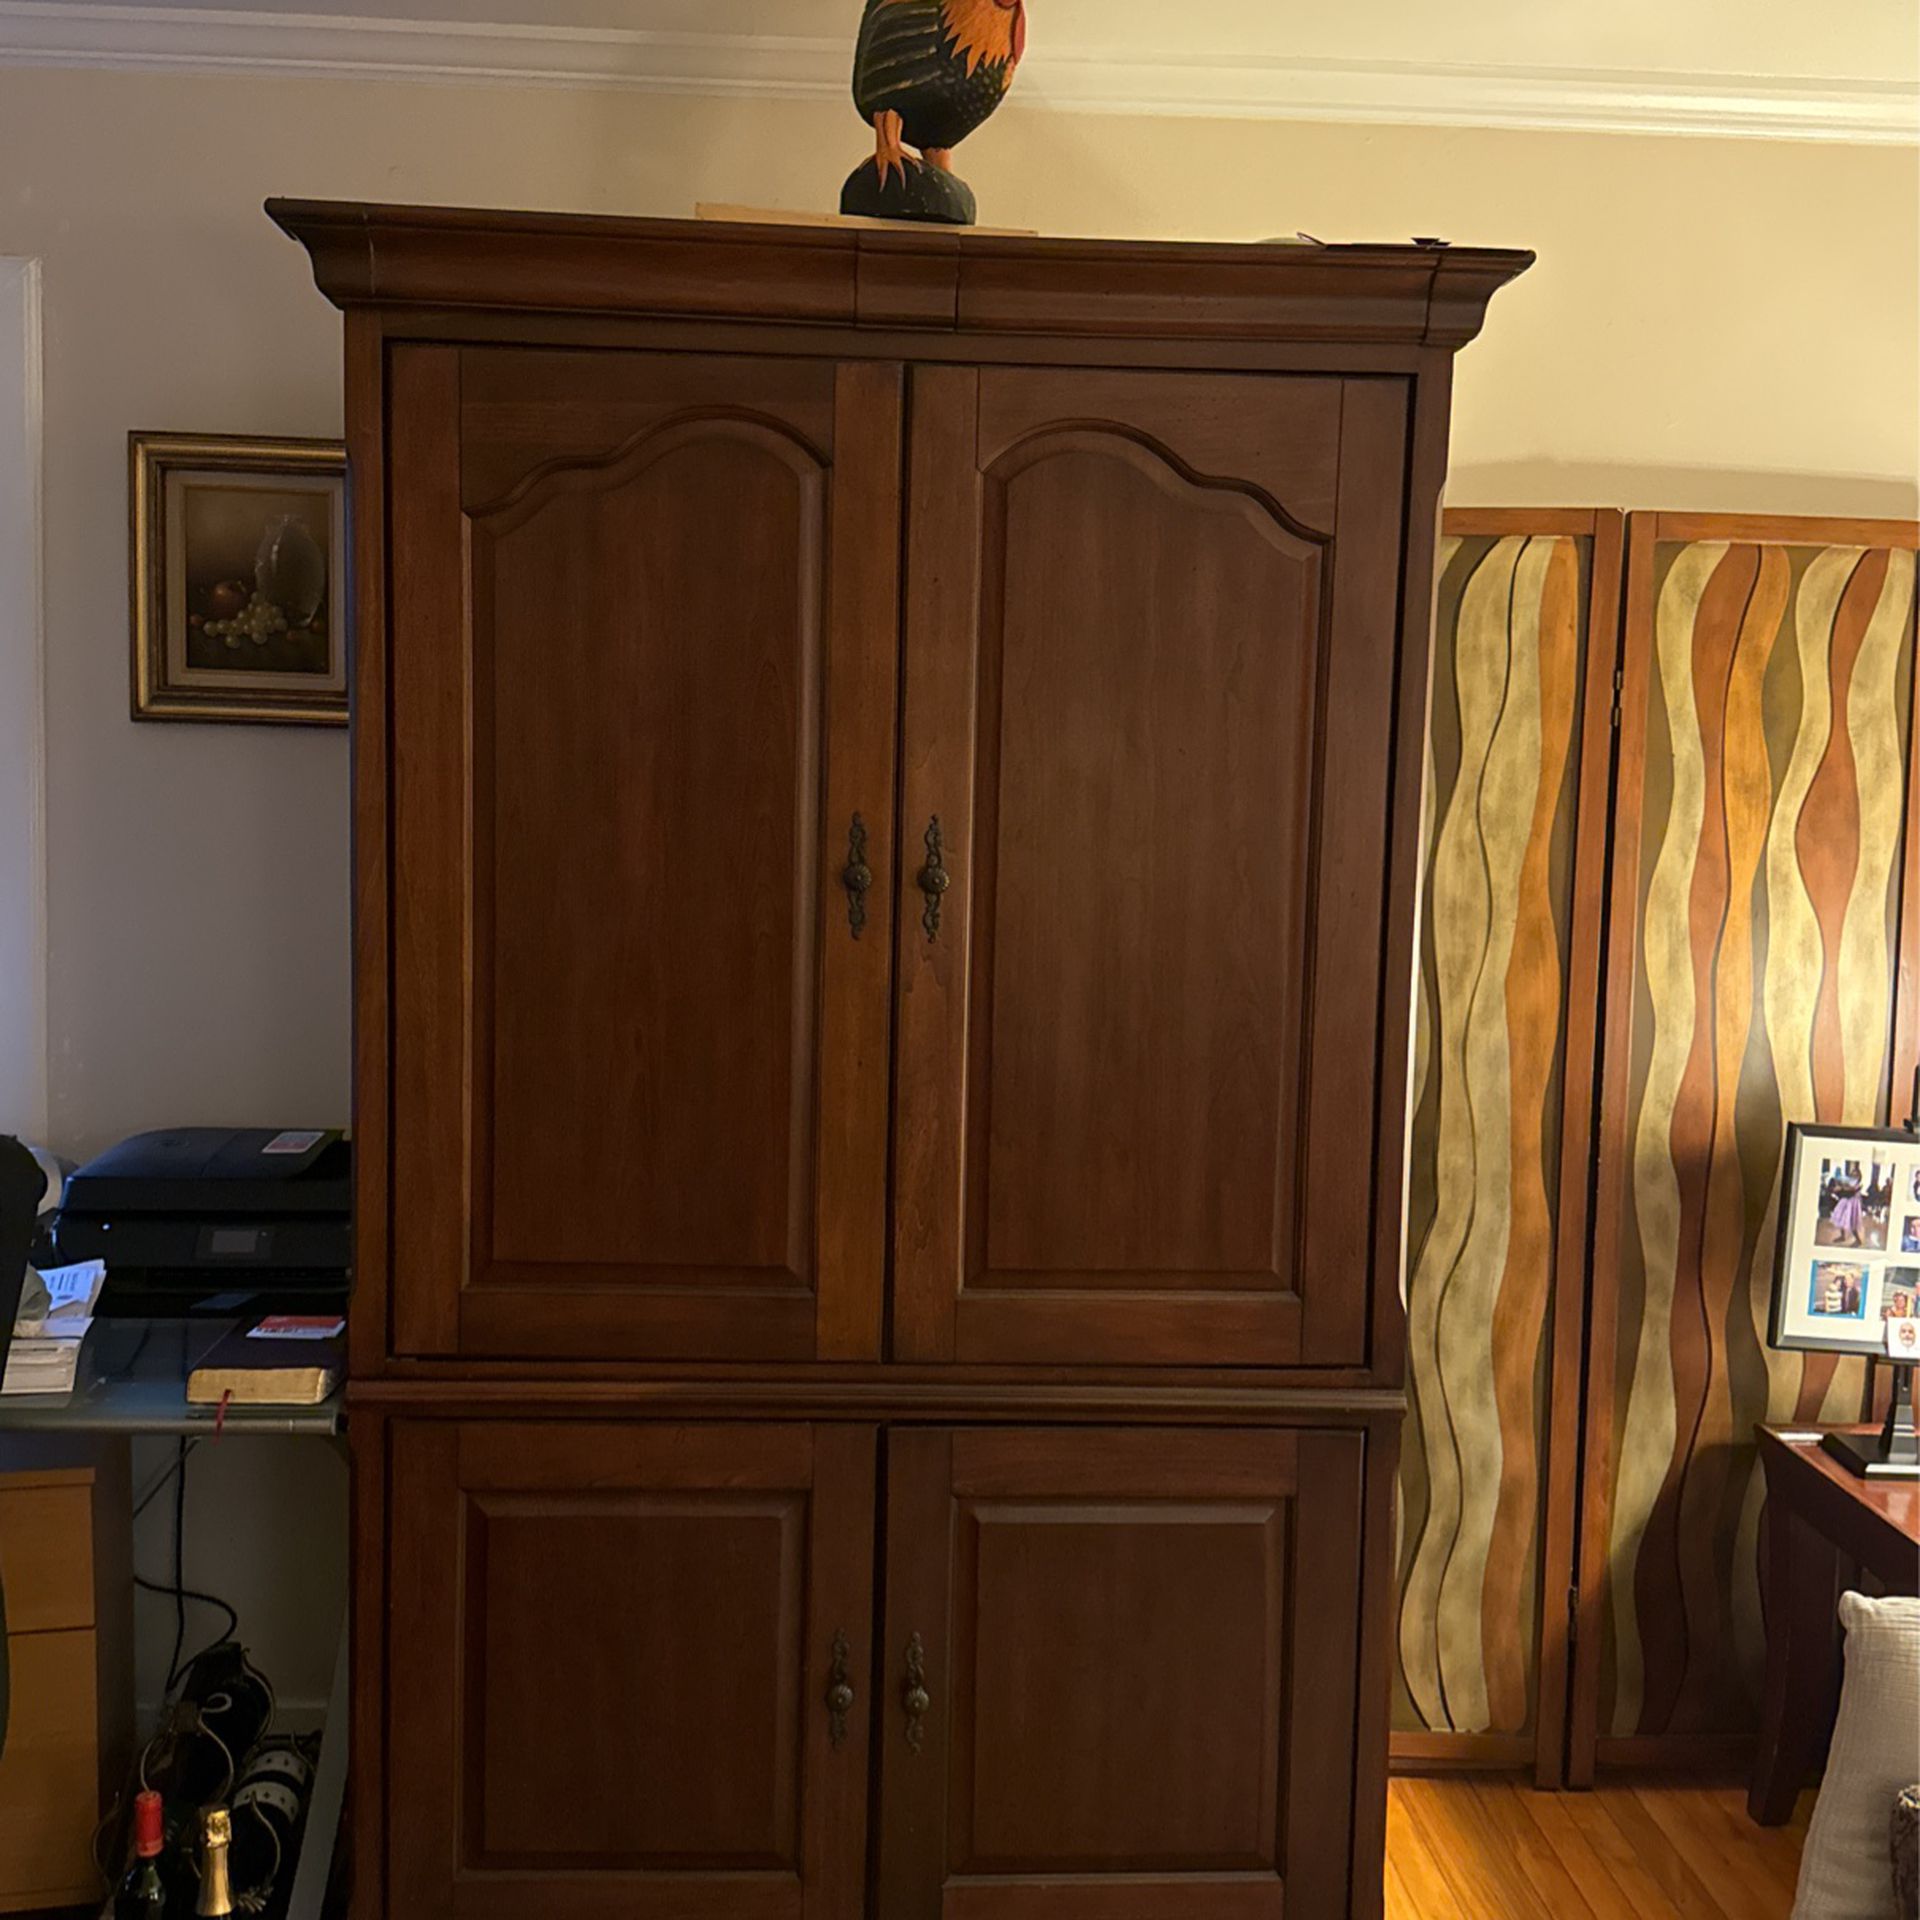 Lowered Price Again! Cherry Wood Armoire tV Cabinet - $125.00